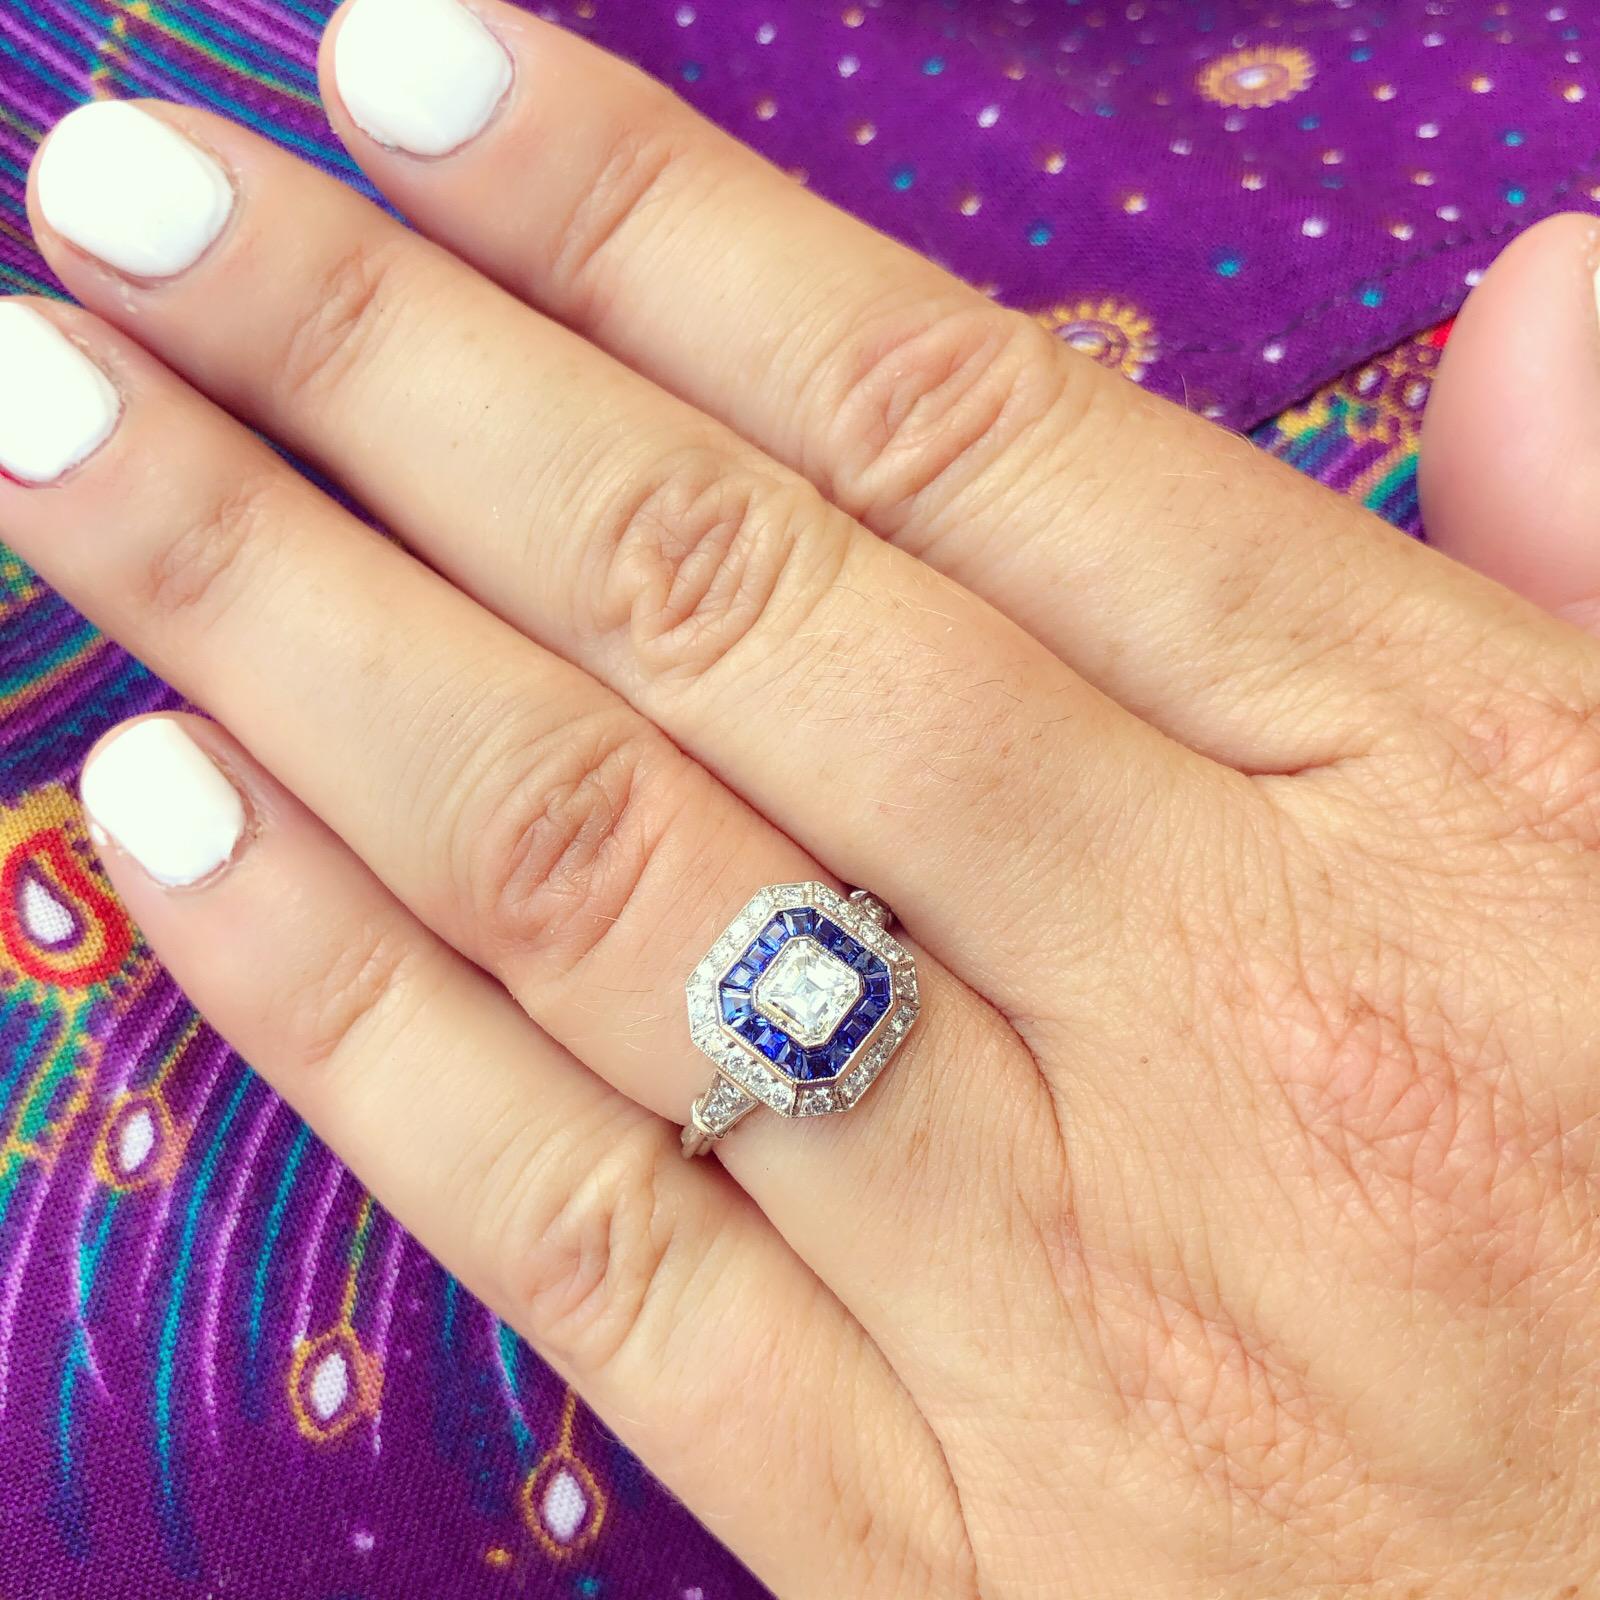 An Art Deco inspired 18k white gold ring for the ages! It centers around a gorgeous bezel-set Asscher-cut diamond, weighing an estimated 0.55 carat, G/VS, set within a frame of calibre-cut sapphires, and then a second frame of 24 round brilliant-cut